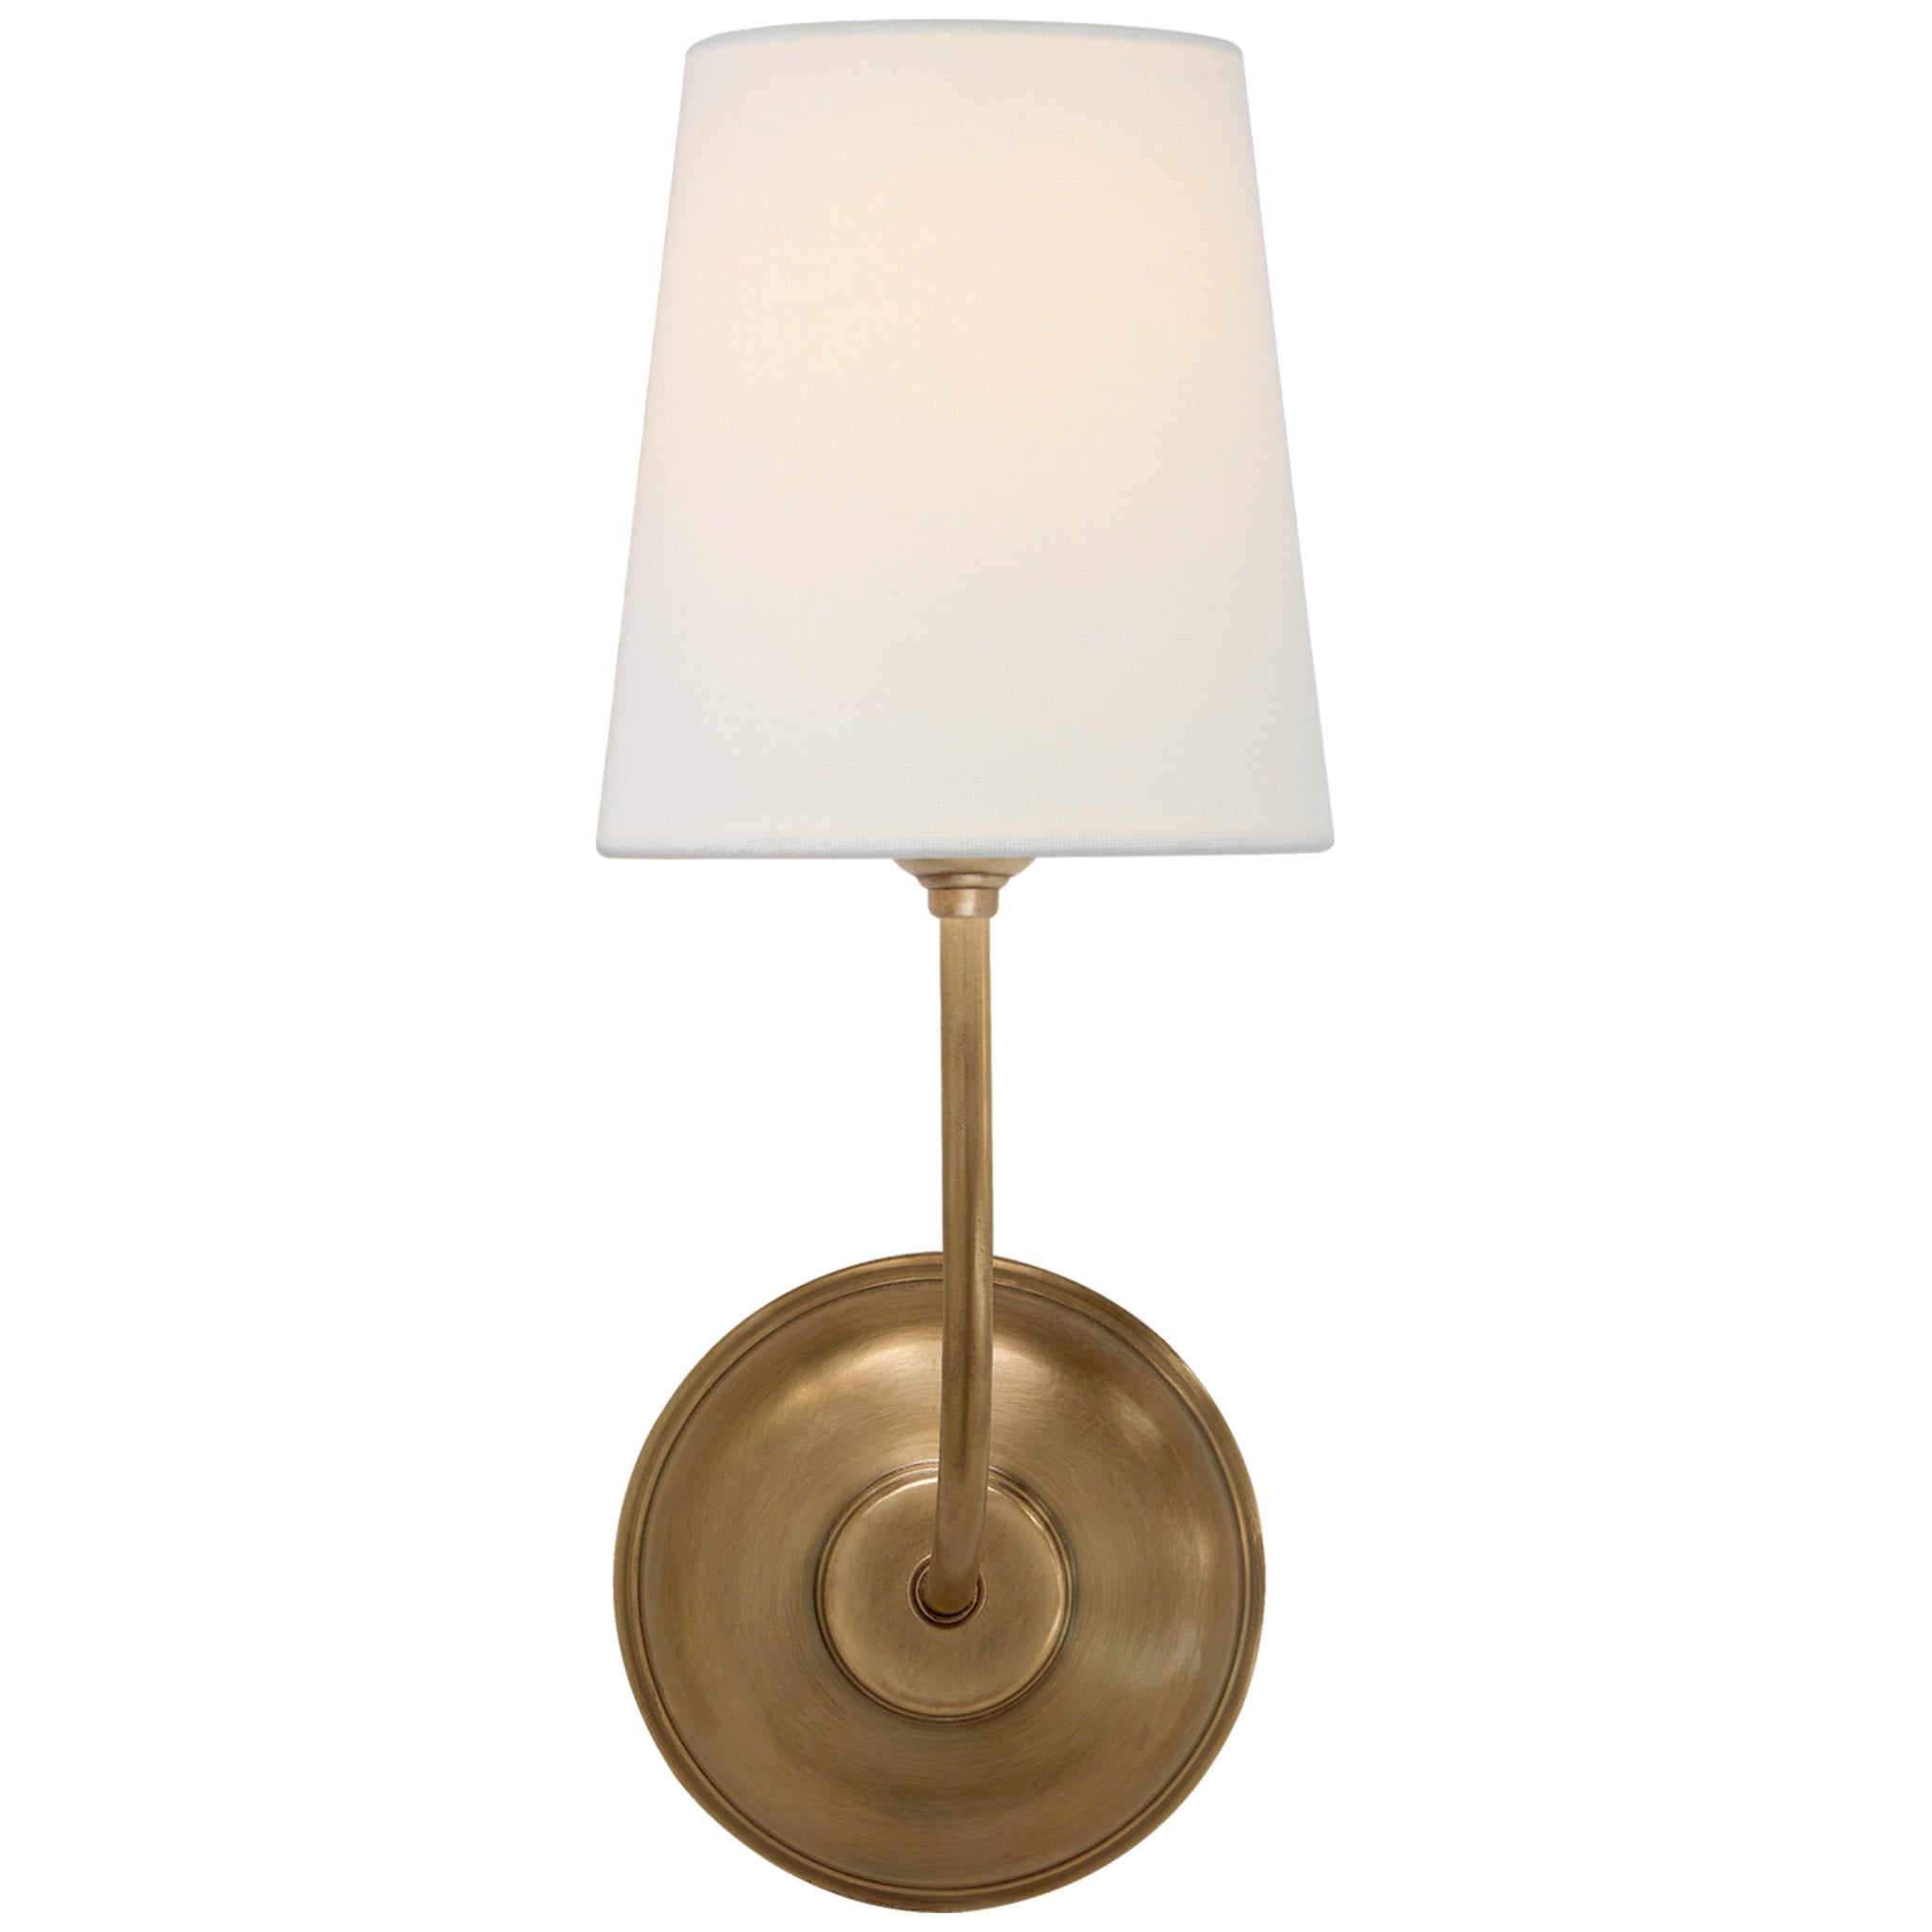 Thomas O'Brien Vendome Single Sconce in Hand-Rubbed Antique Brass with Linen Shade